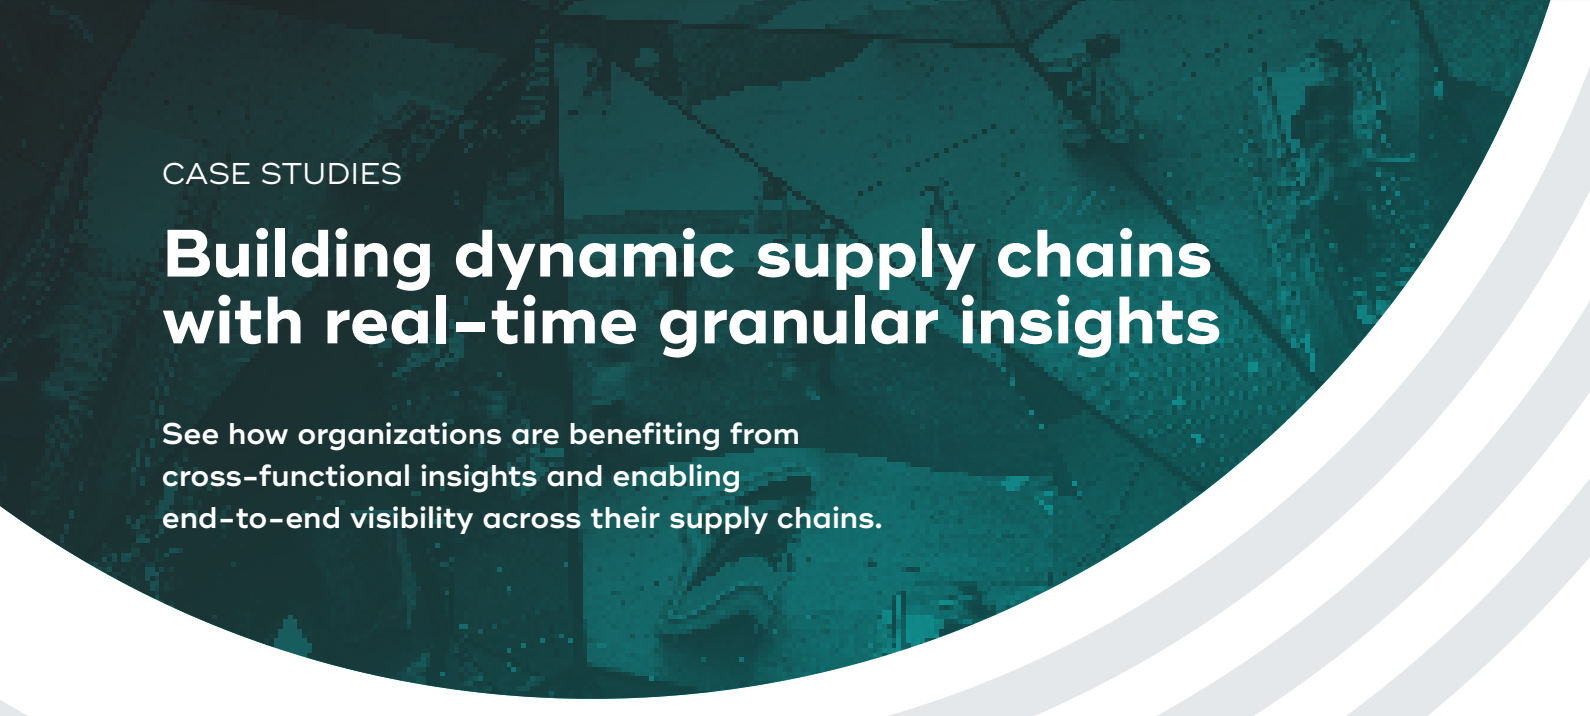 Build a dynamic supply chain for cross-functional insights and end-to-end visibility